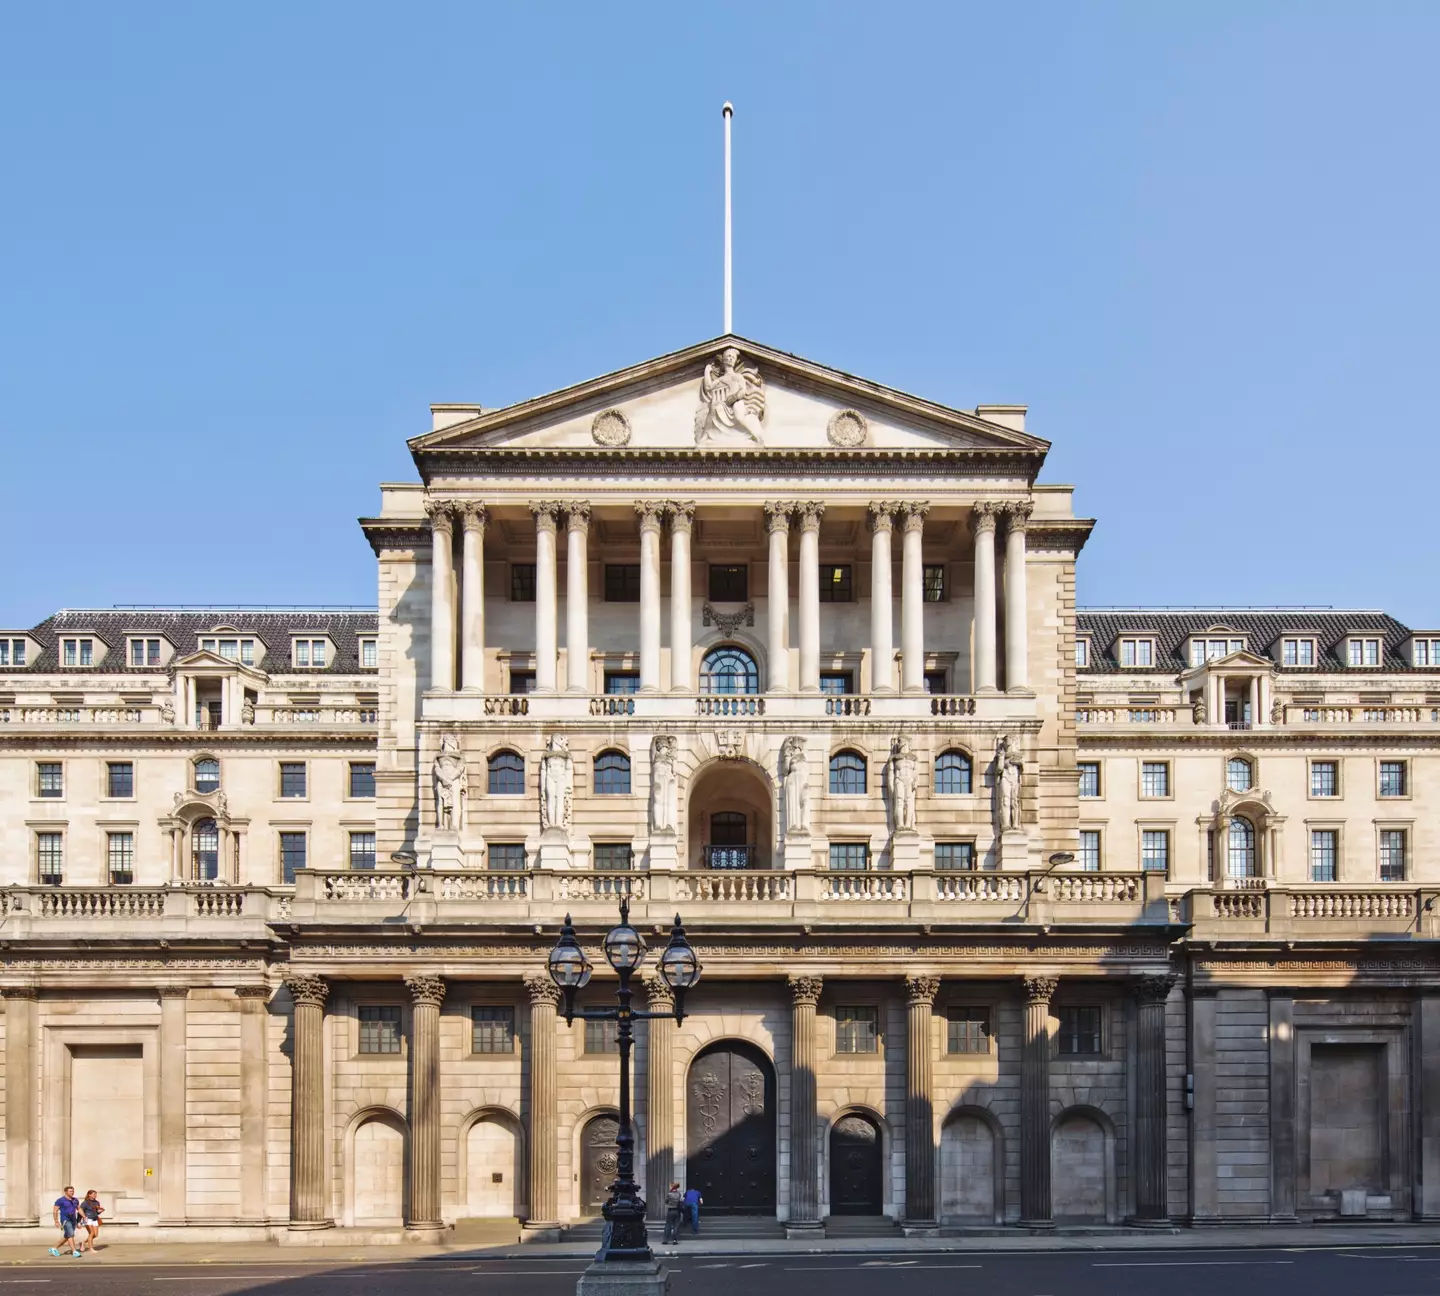 The Bank of England has since issued a warning over these schemes to homebuyers.